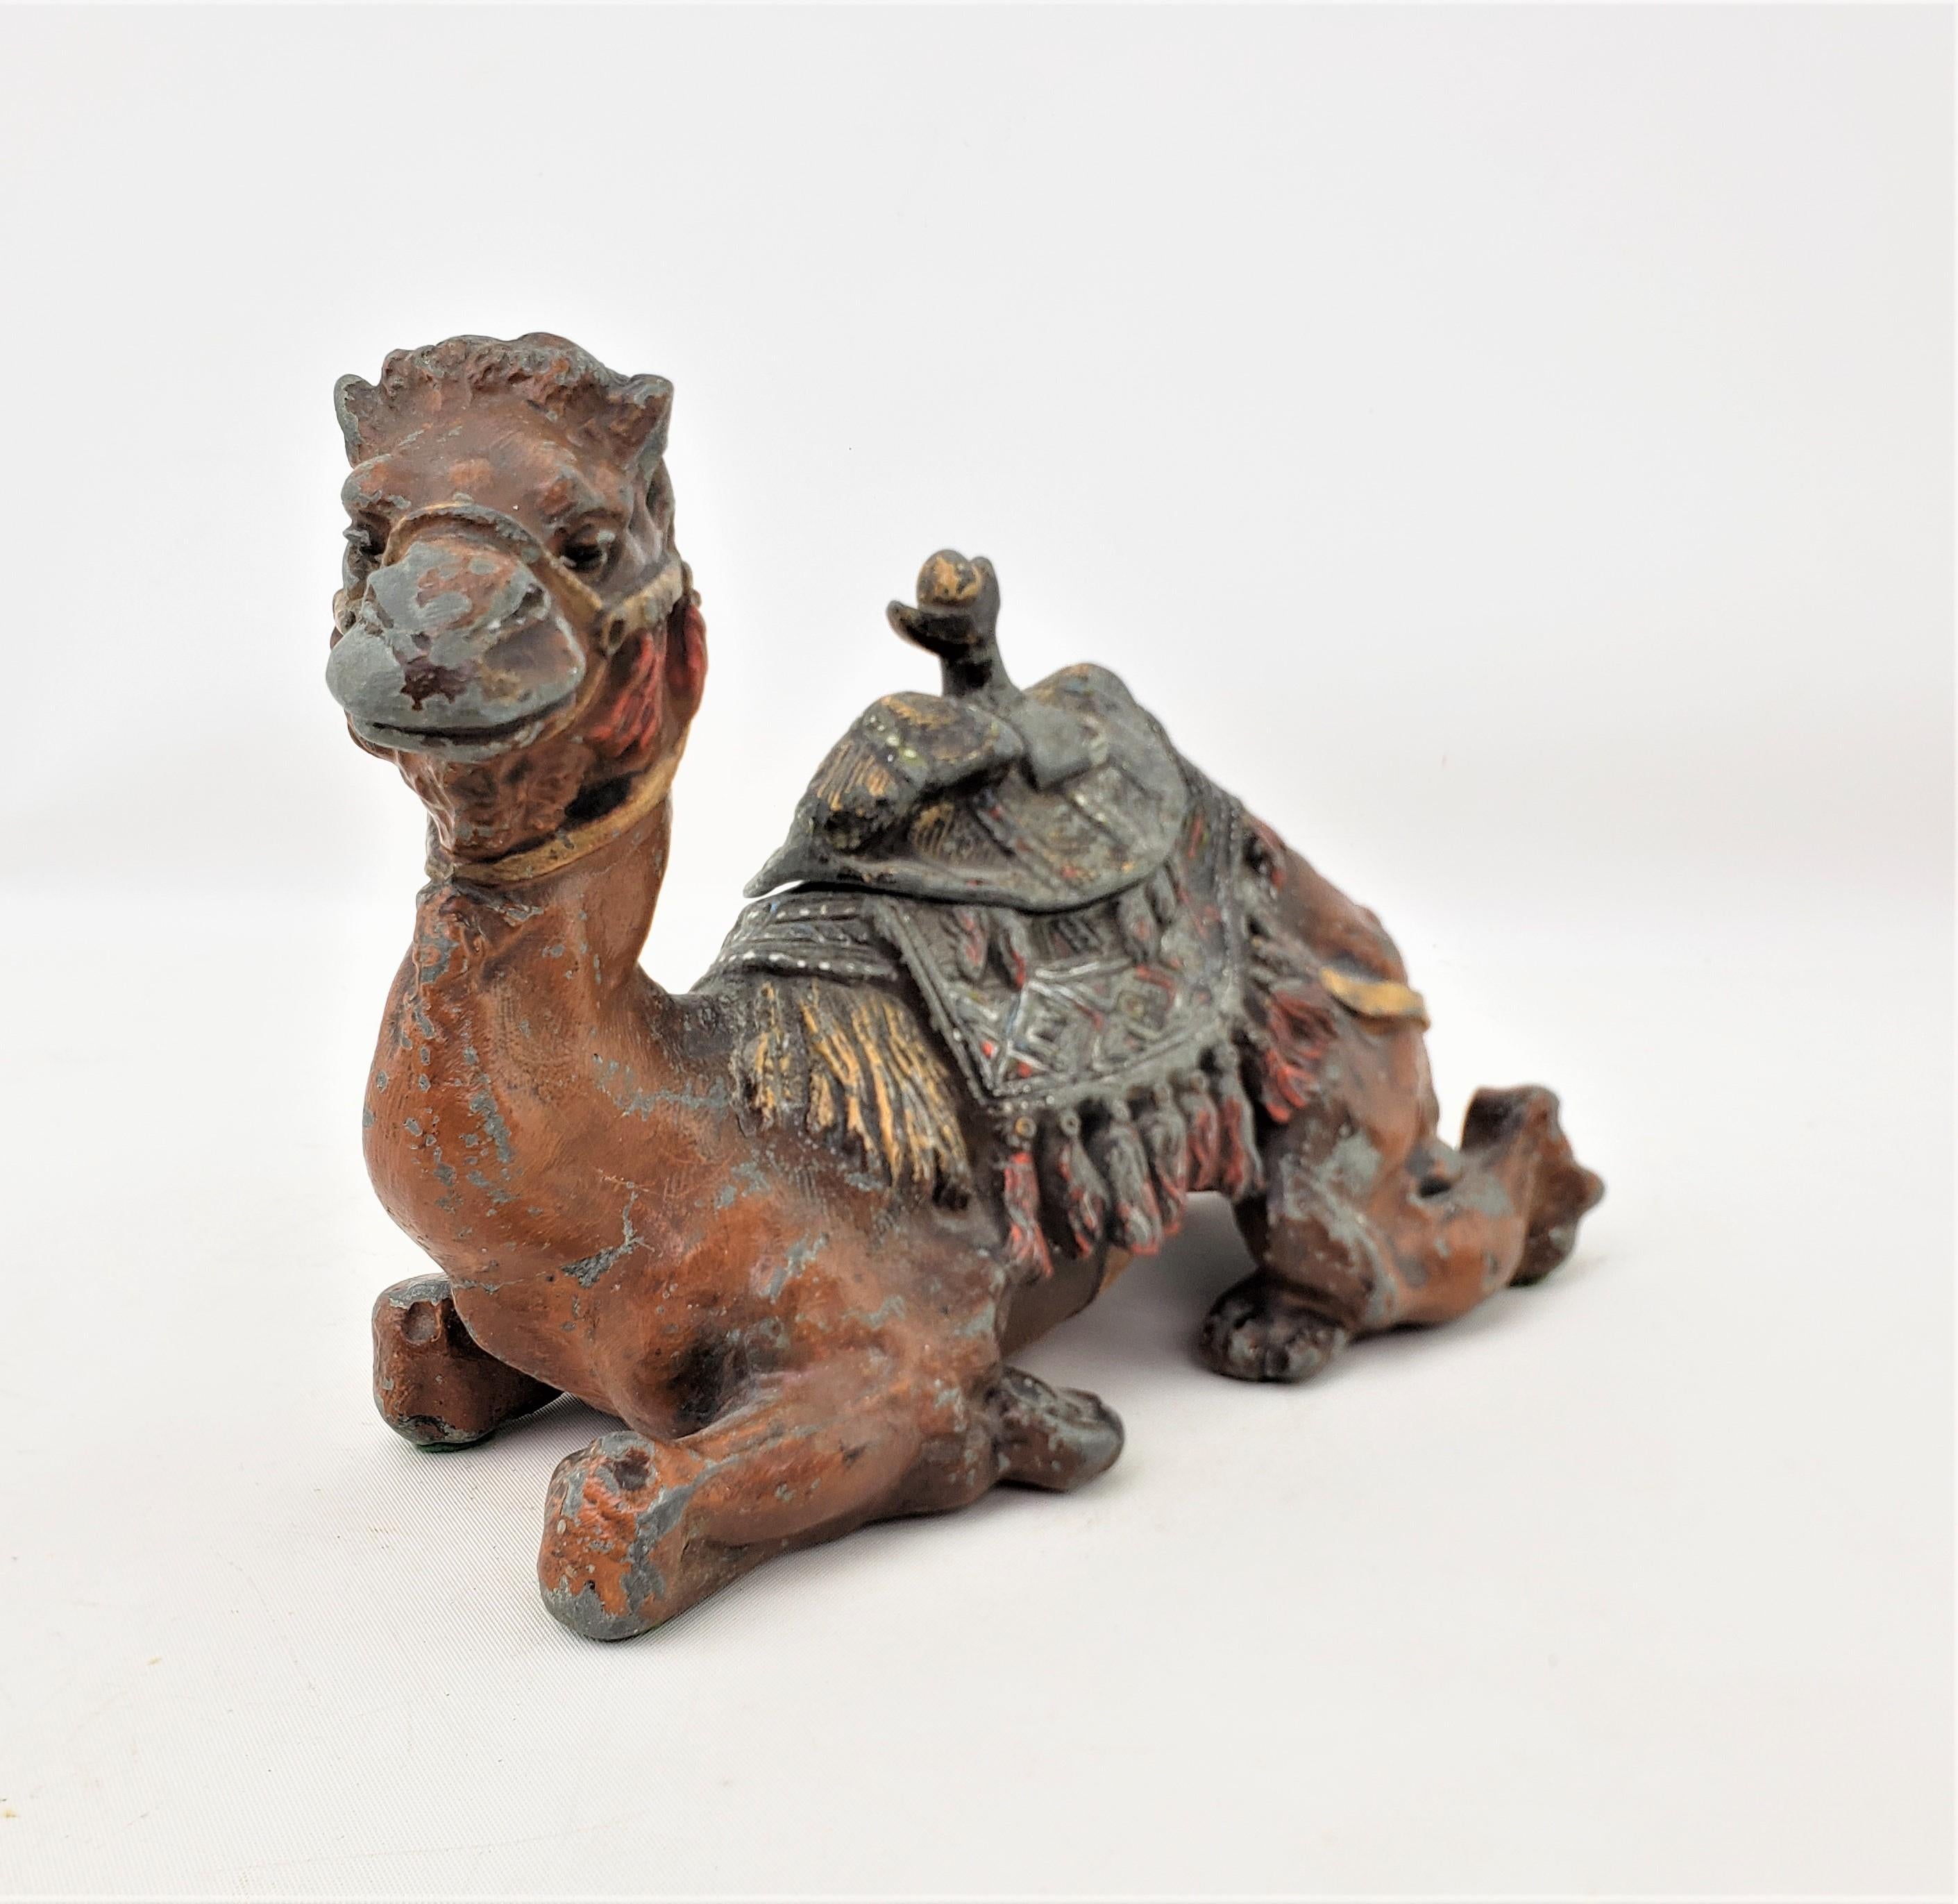 This antique cast and cold-painted inkwell has no maker's marks, but presumed to have originated from Austria and dating to approximately 1900 and done in the Anglo-Indian style. This ornately cast figural sitting camel has been hand-painted in a